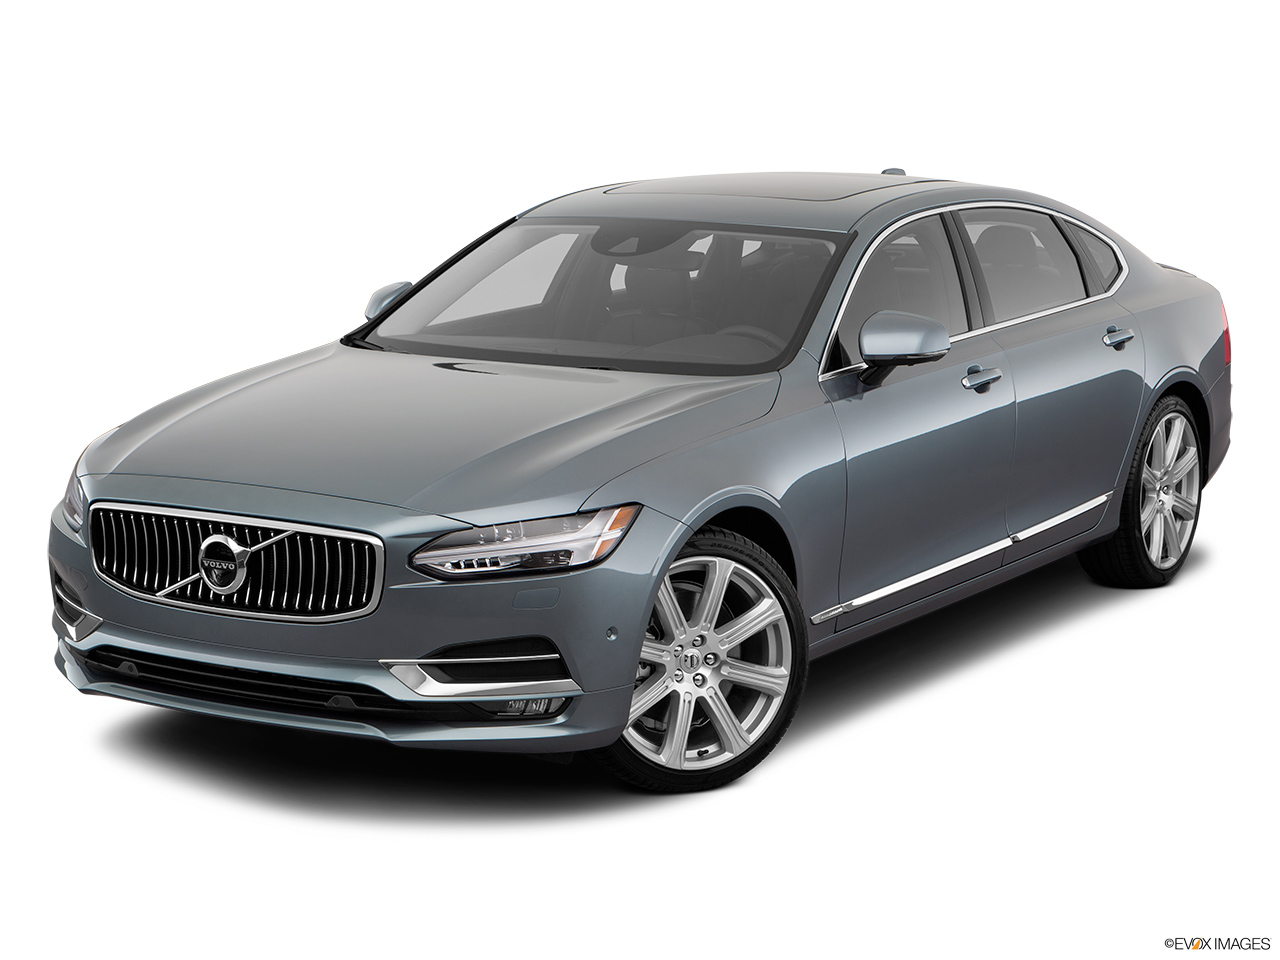 2020 Volvo S90 T6 Inscription Front angle view. 